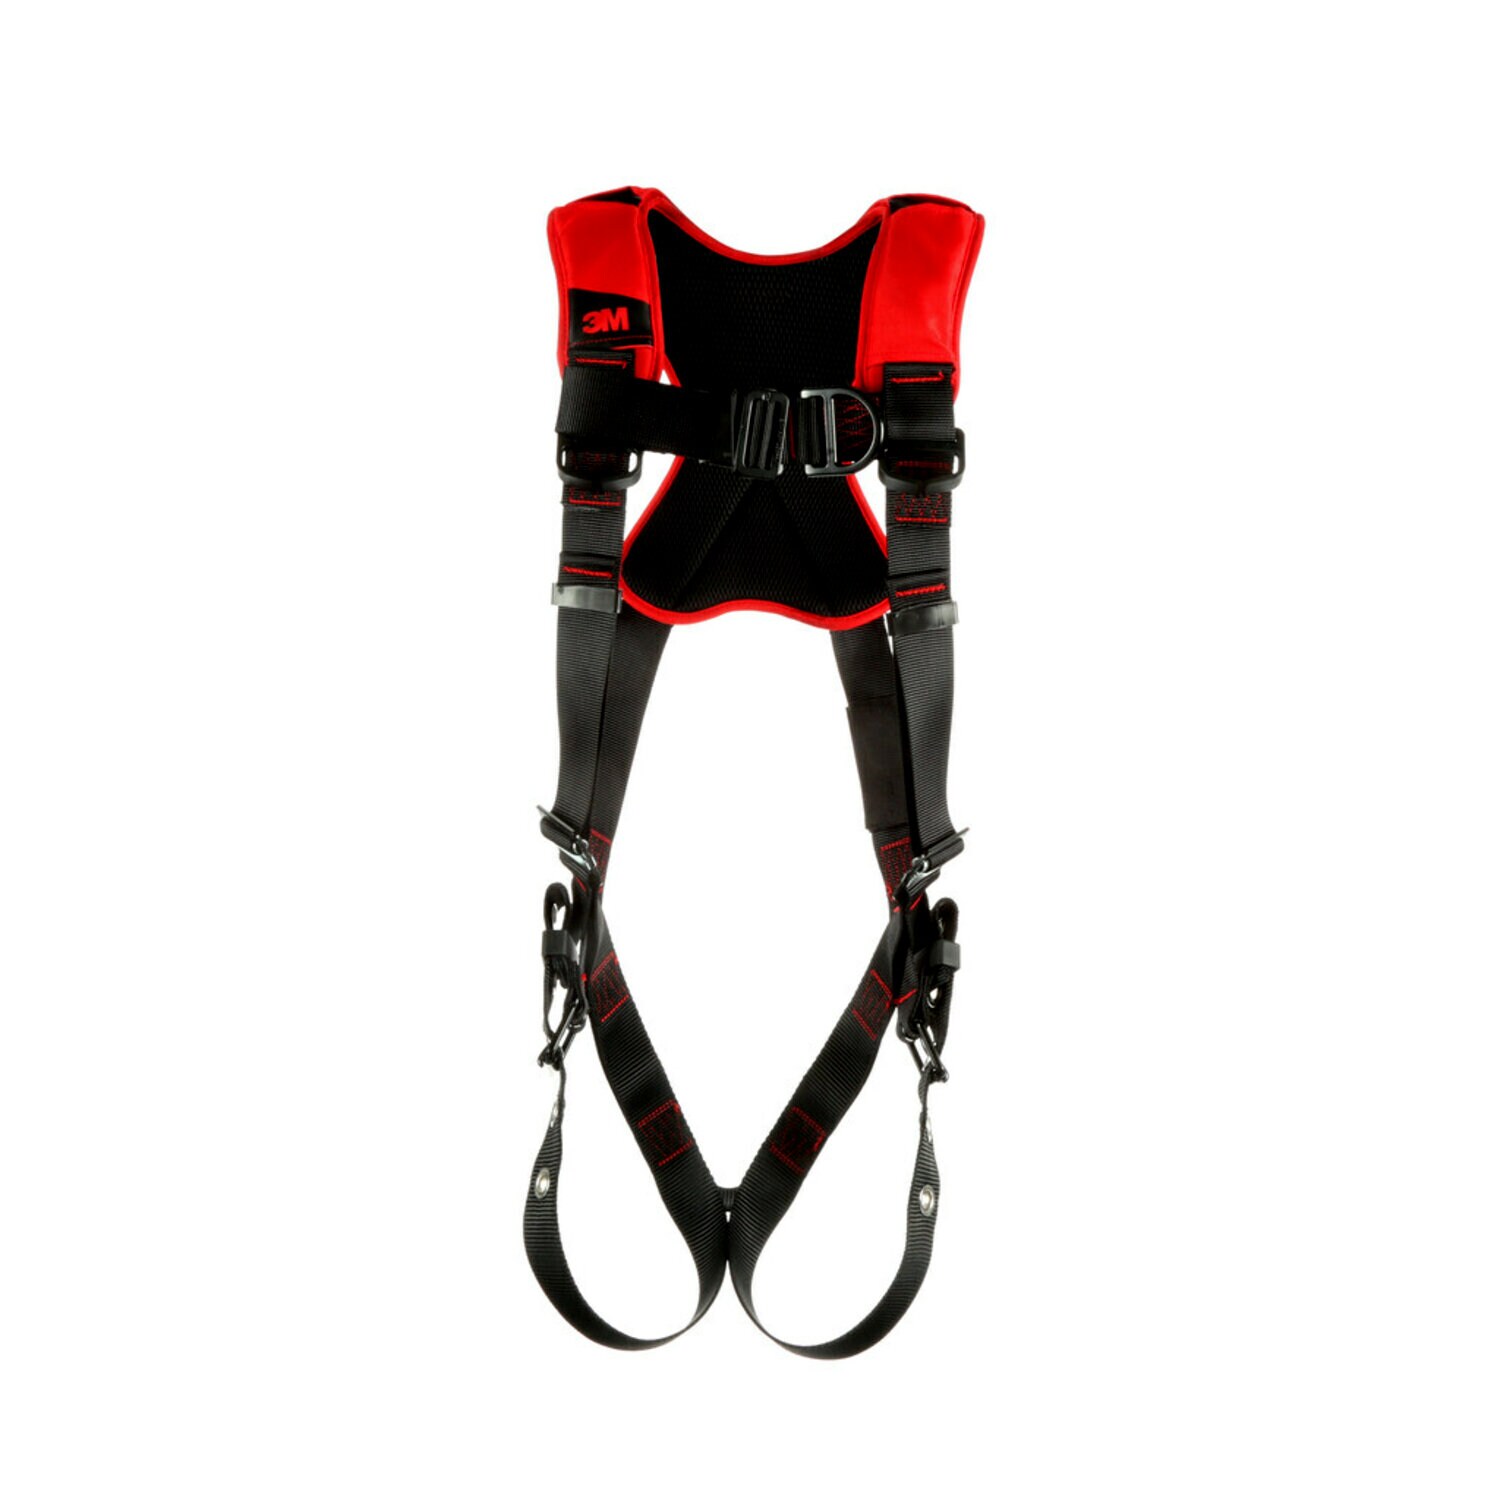 7012816707 - 3M Protecta P200 Comfort Vest Climbing Safety Harness 1161429, Small